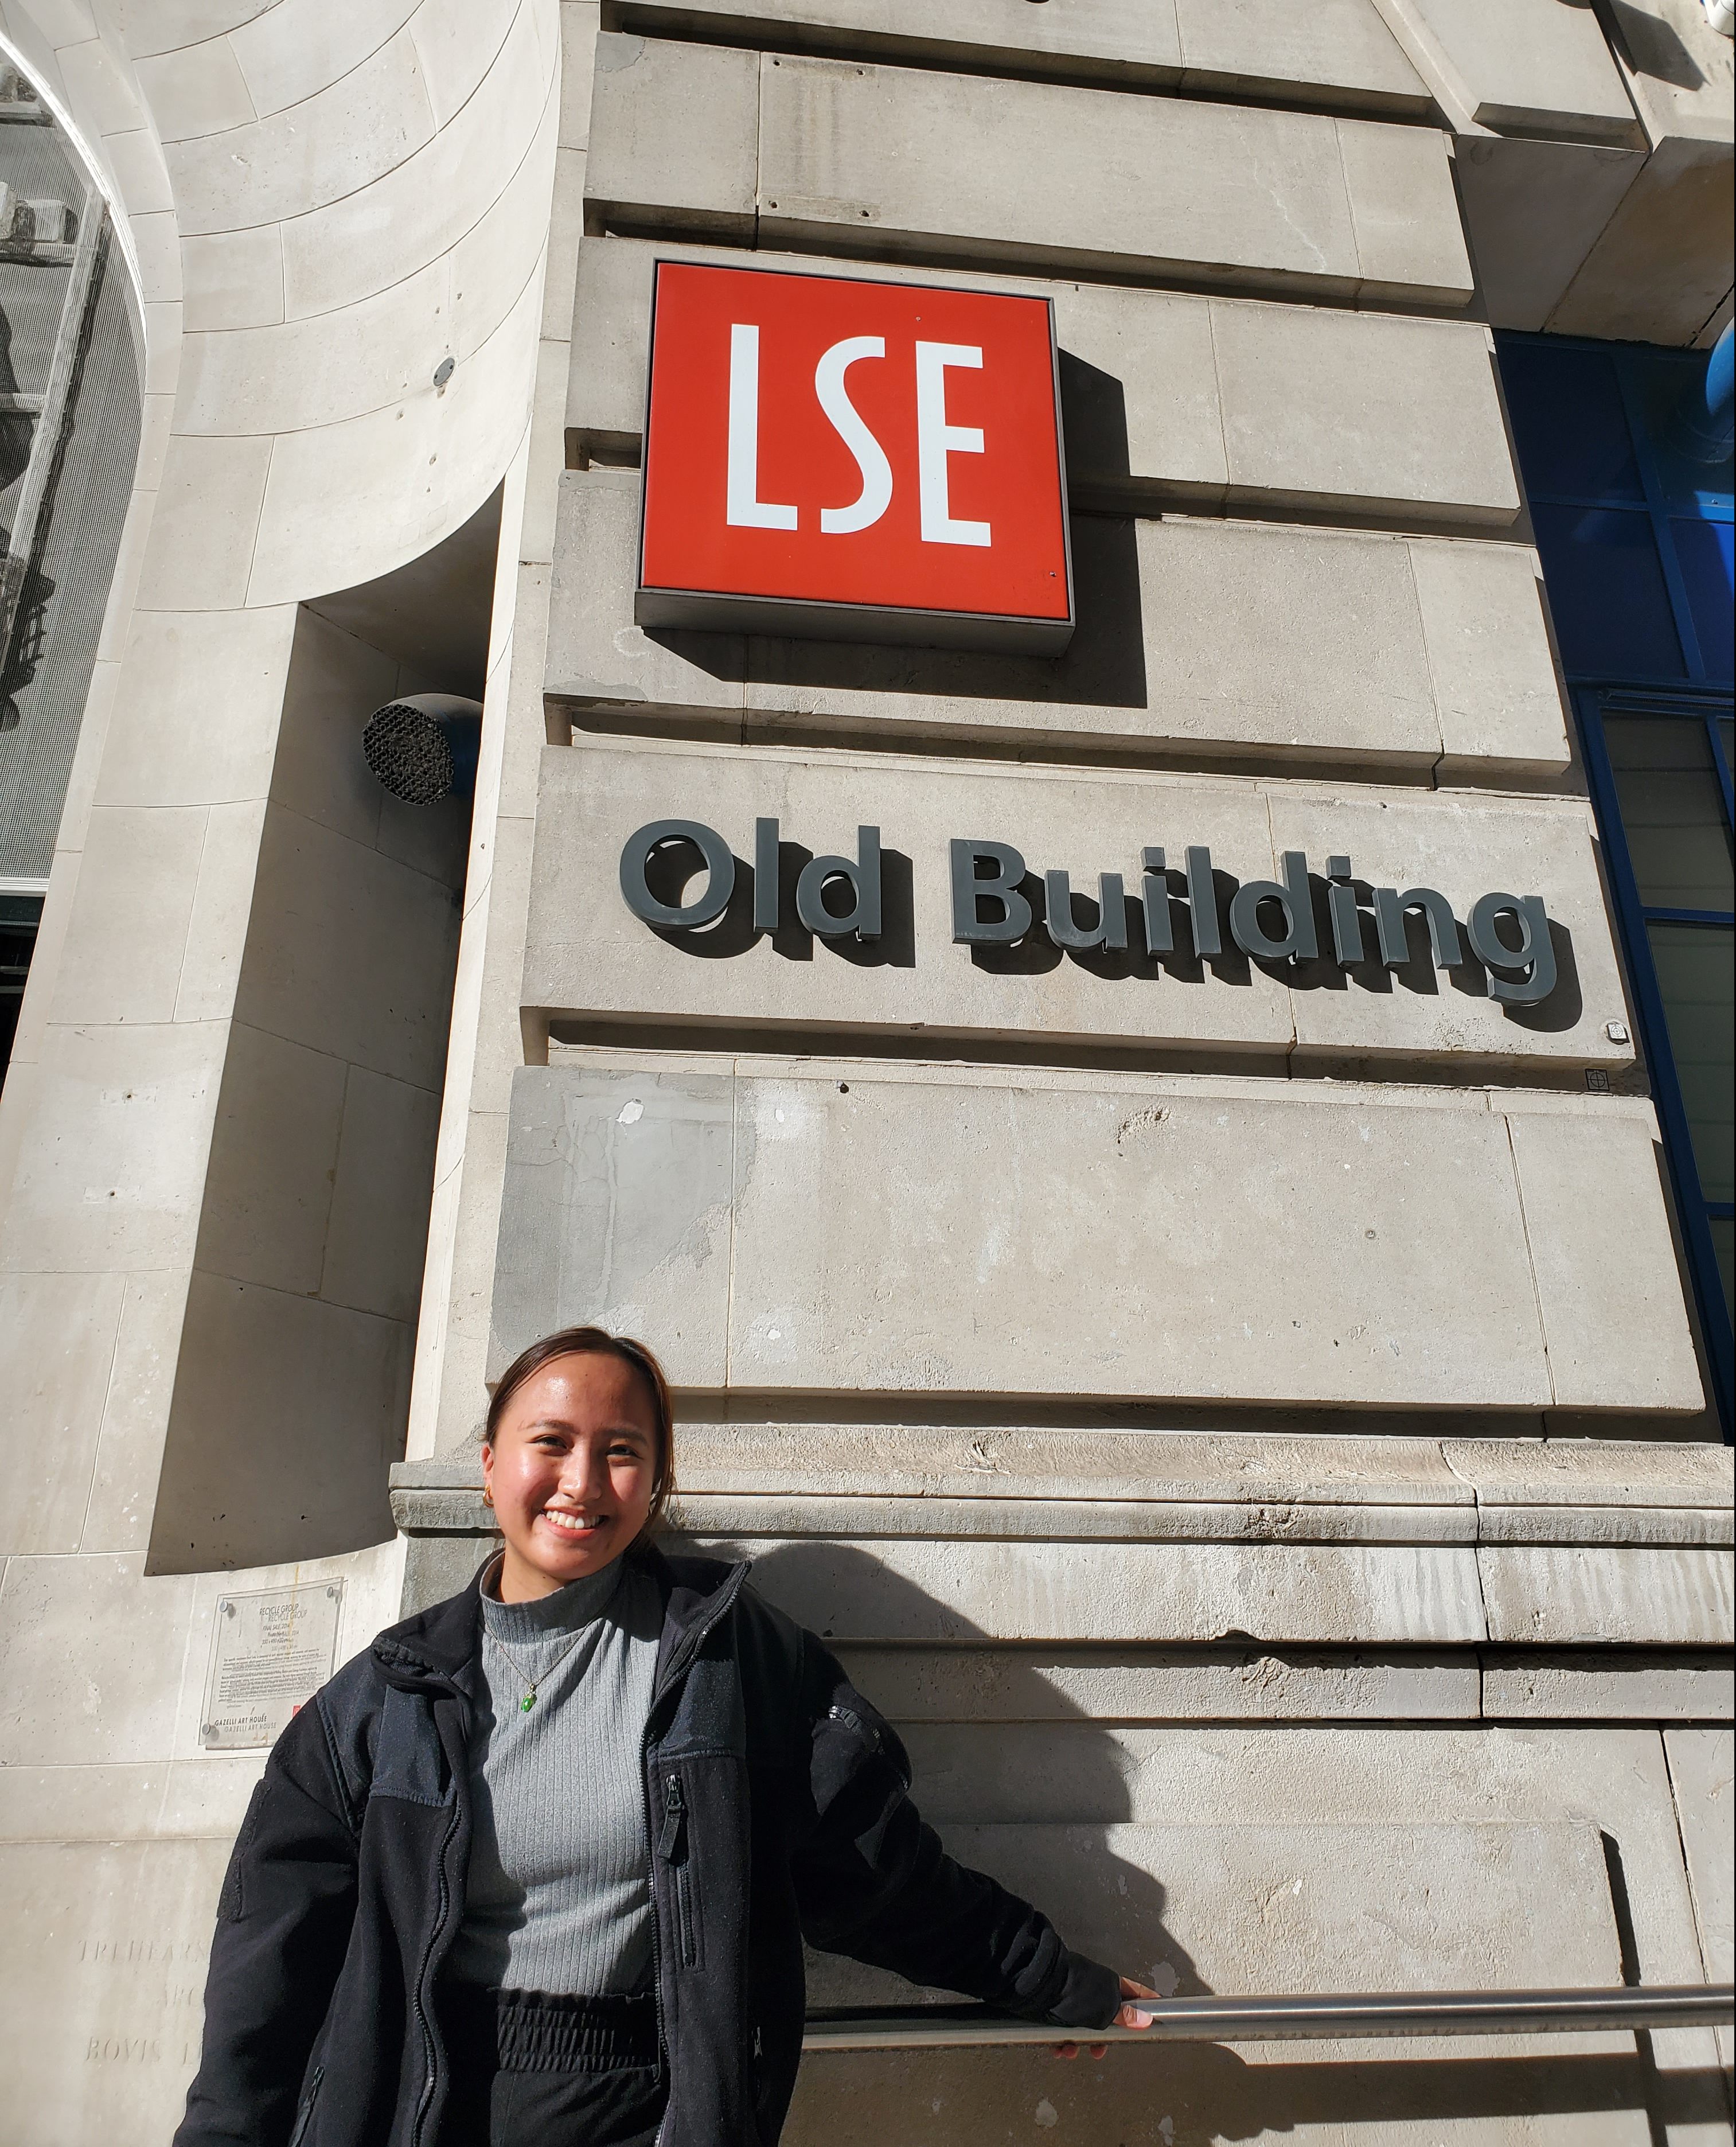 LSE graduate student on campus standing outside the Old Building